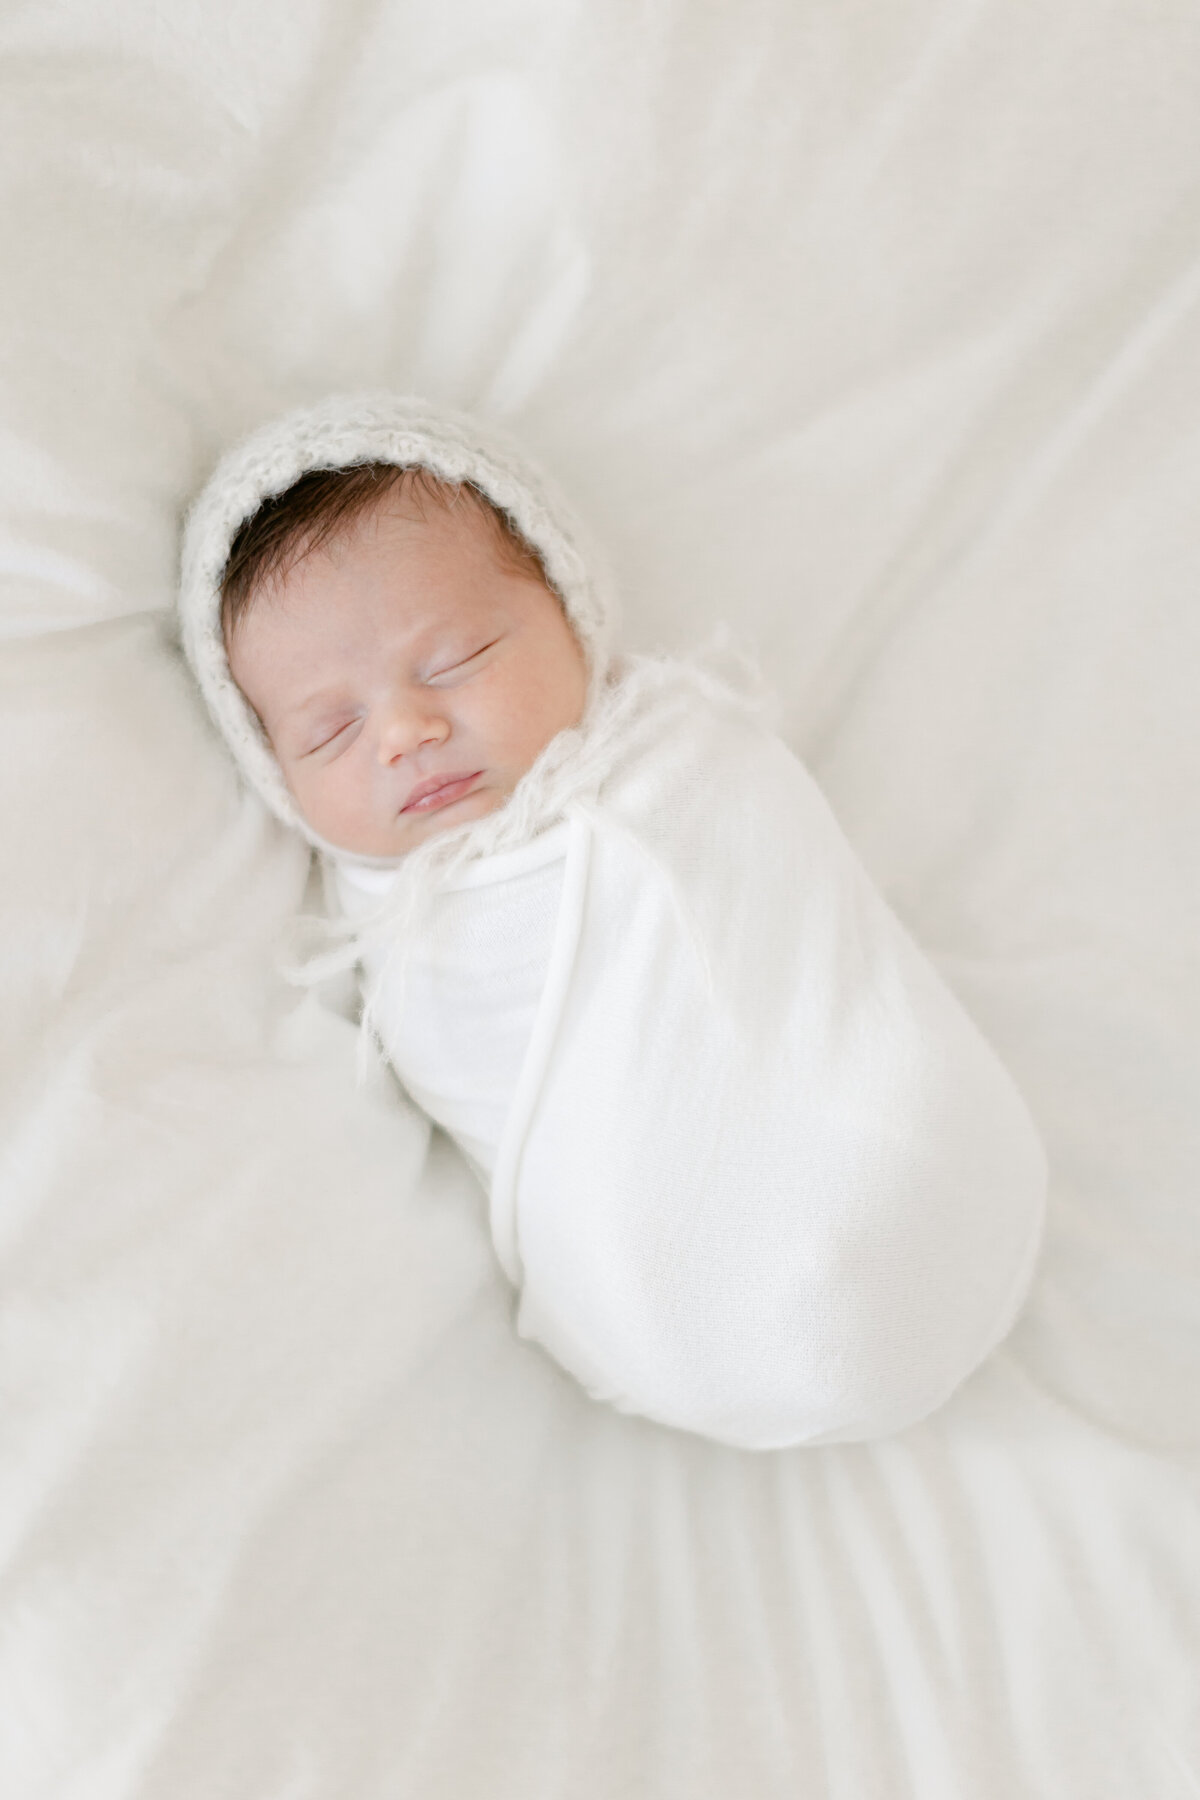 Newborn baby wearing a bonnet laying on a bed photographed by South Jersey Newborn Photographer Tara Federico